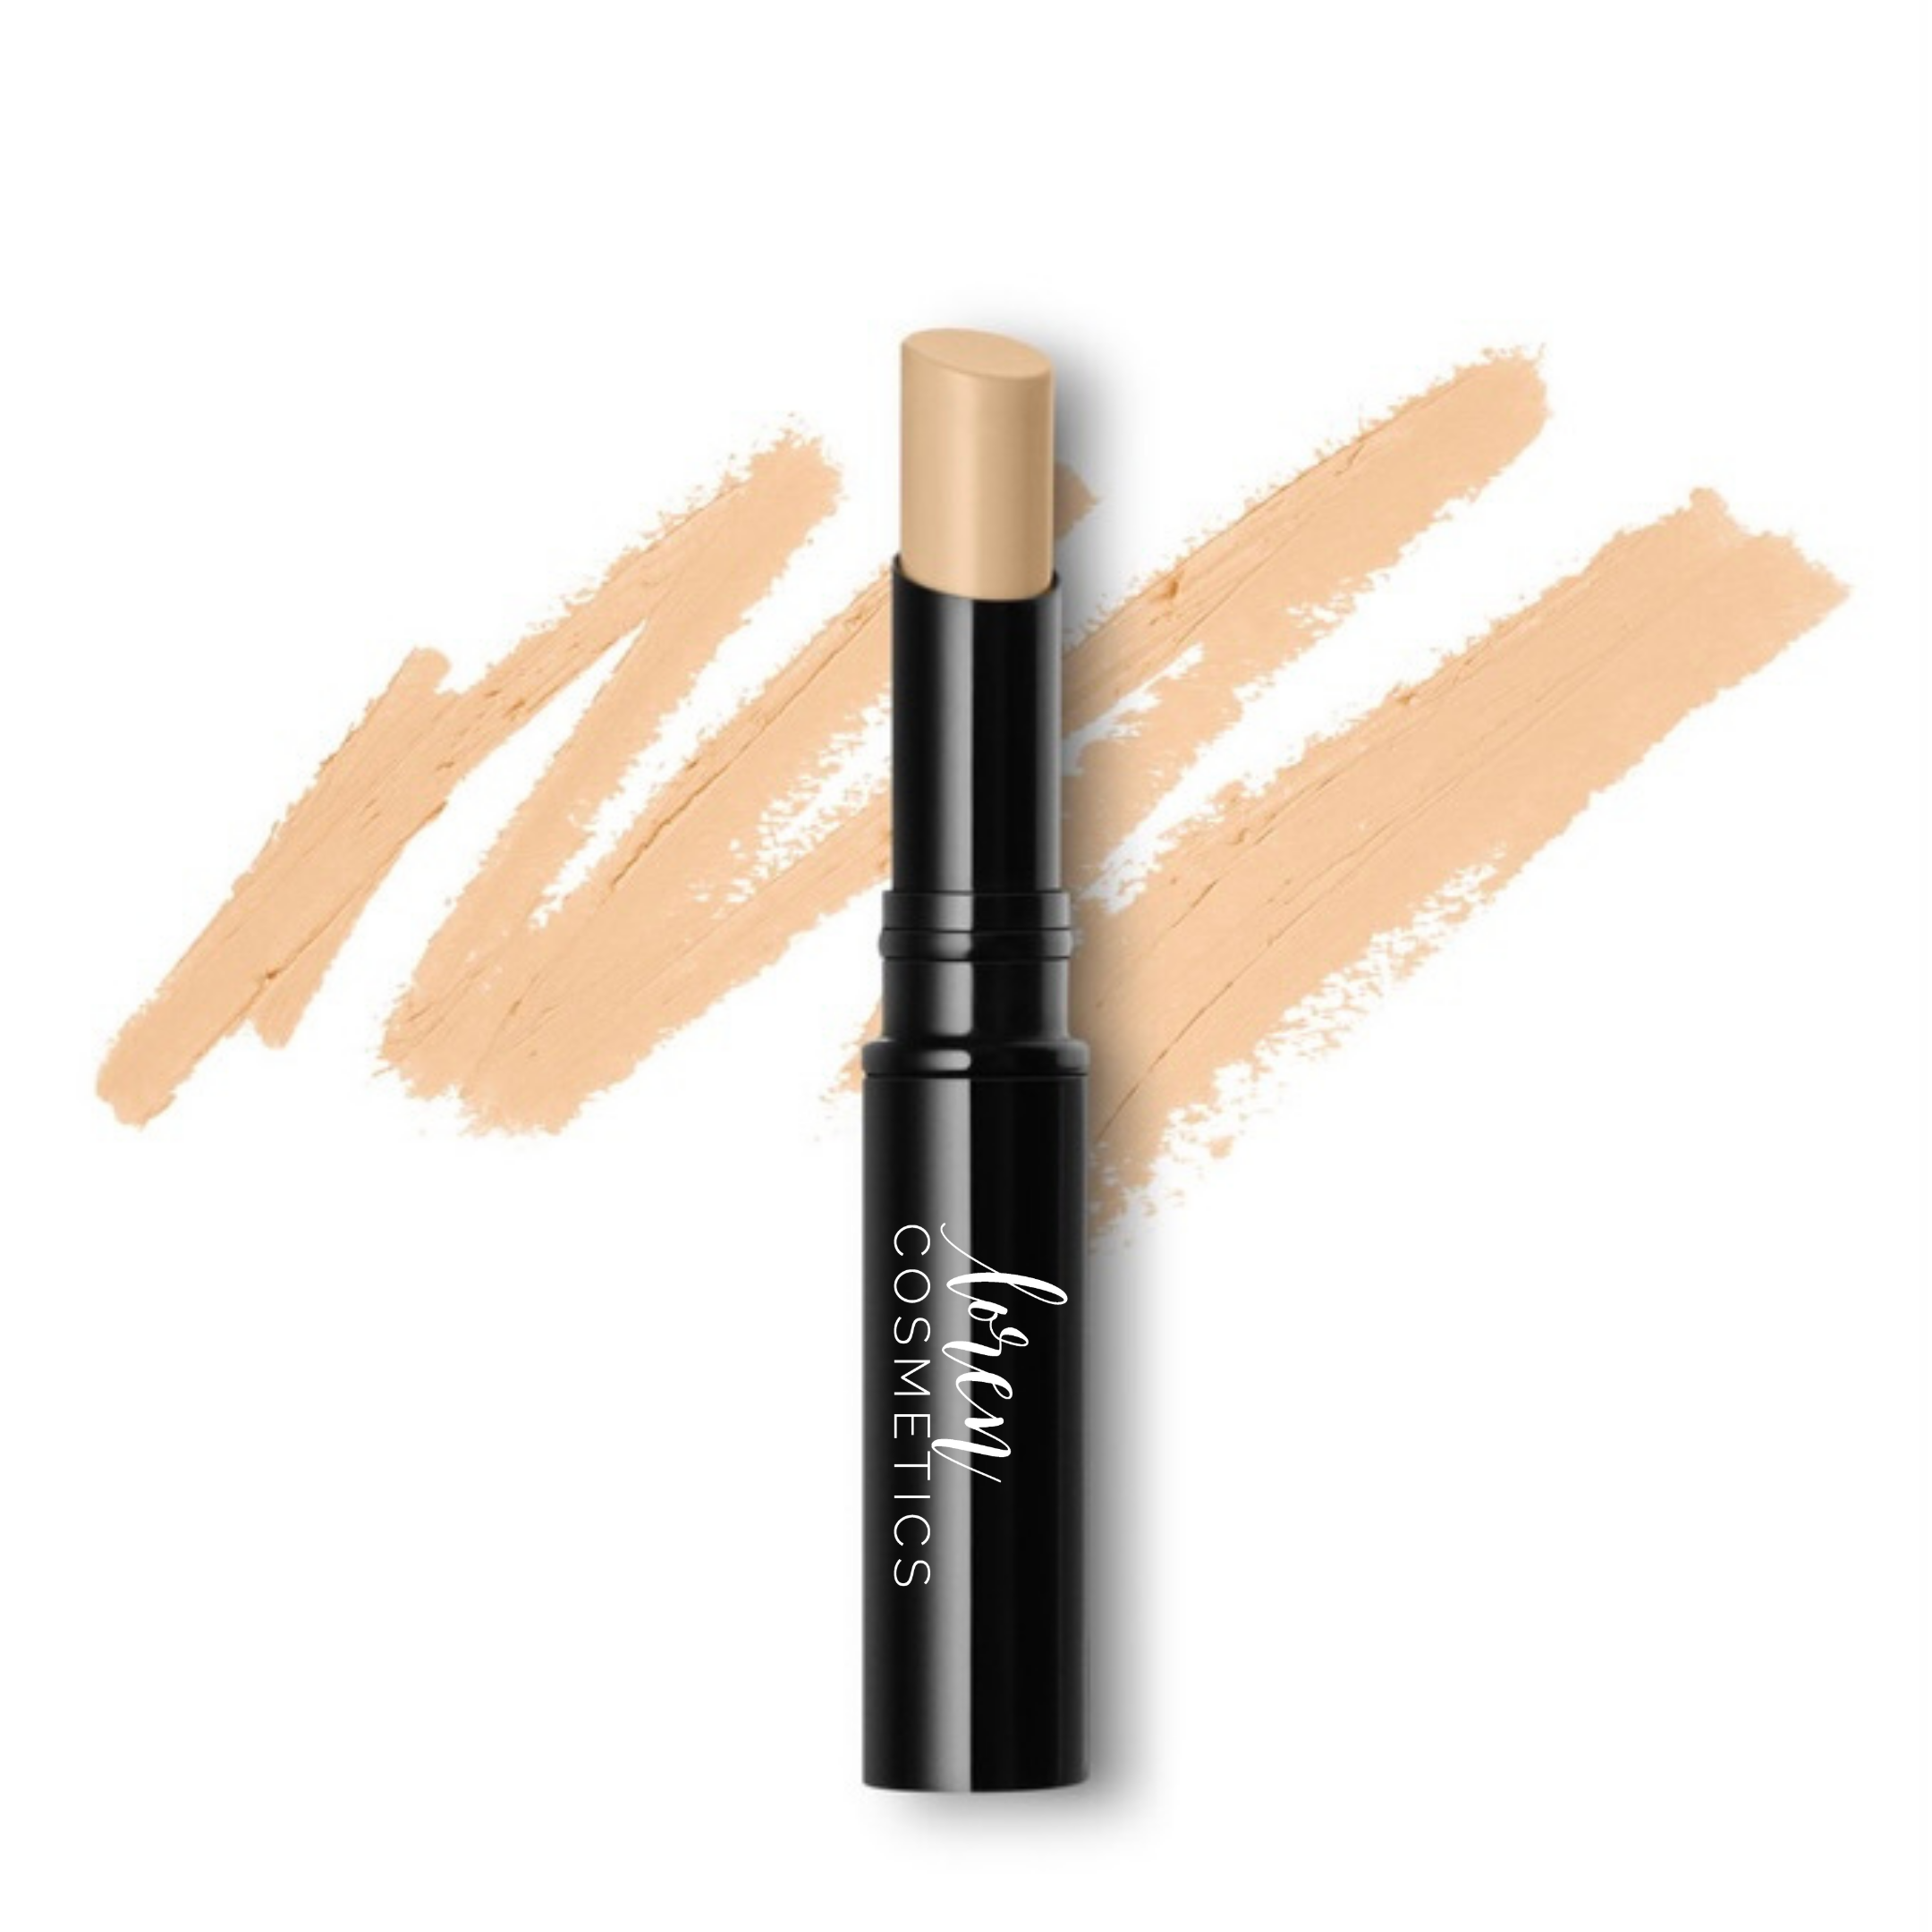 Photo Touch Concealer